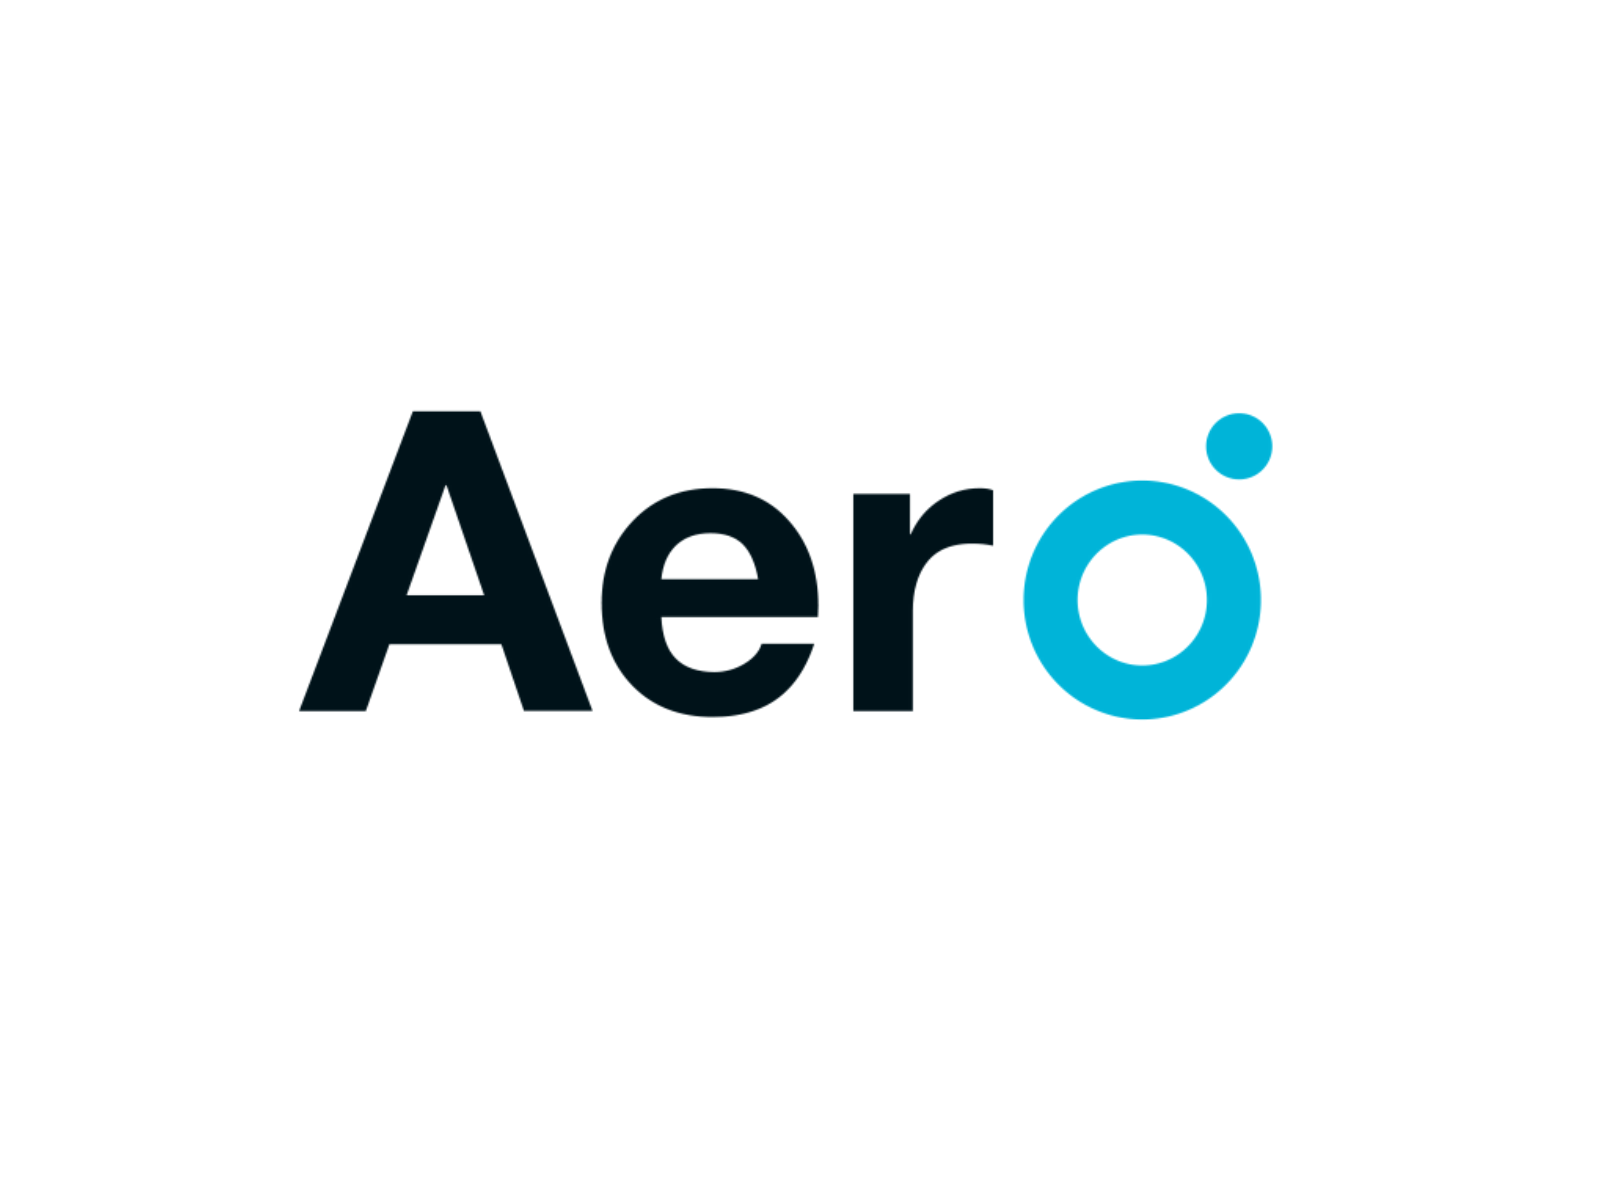 Aero - Logo Animation aero after effects animated logo animation logo animation logo reveal logofolio magazine online planet science space